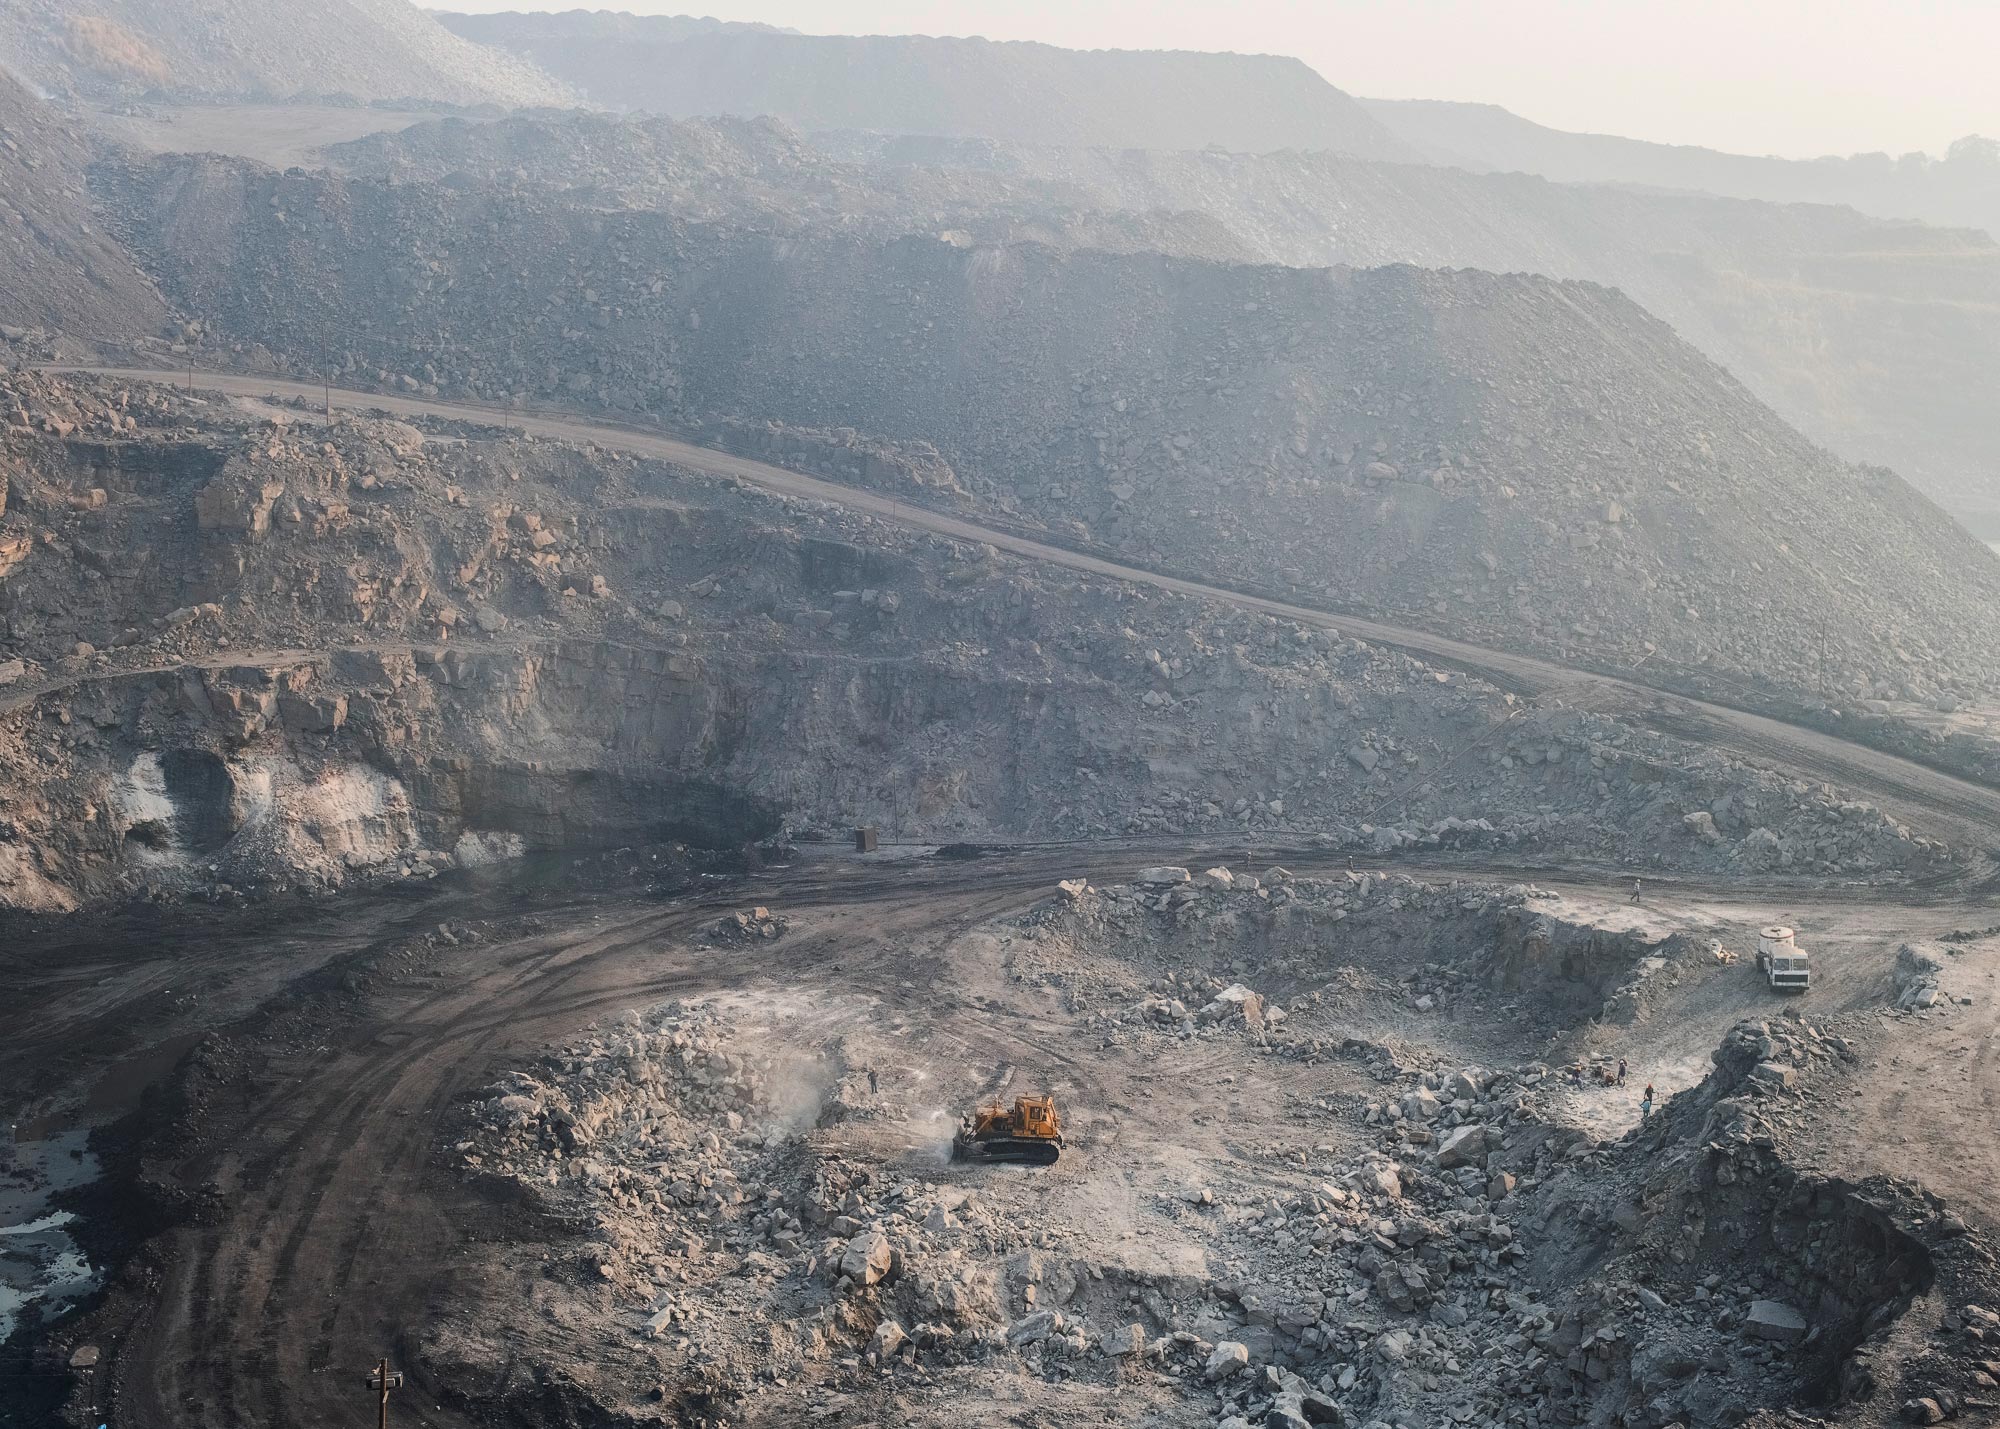 Jharia coalfield in Dhanbad, in the state of Jharkhand. Mountaintop removal is a form of surface mining where the tops of mountains are dynamited and removed to access coal seams. (Sarker Protick for TIME)